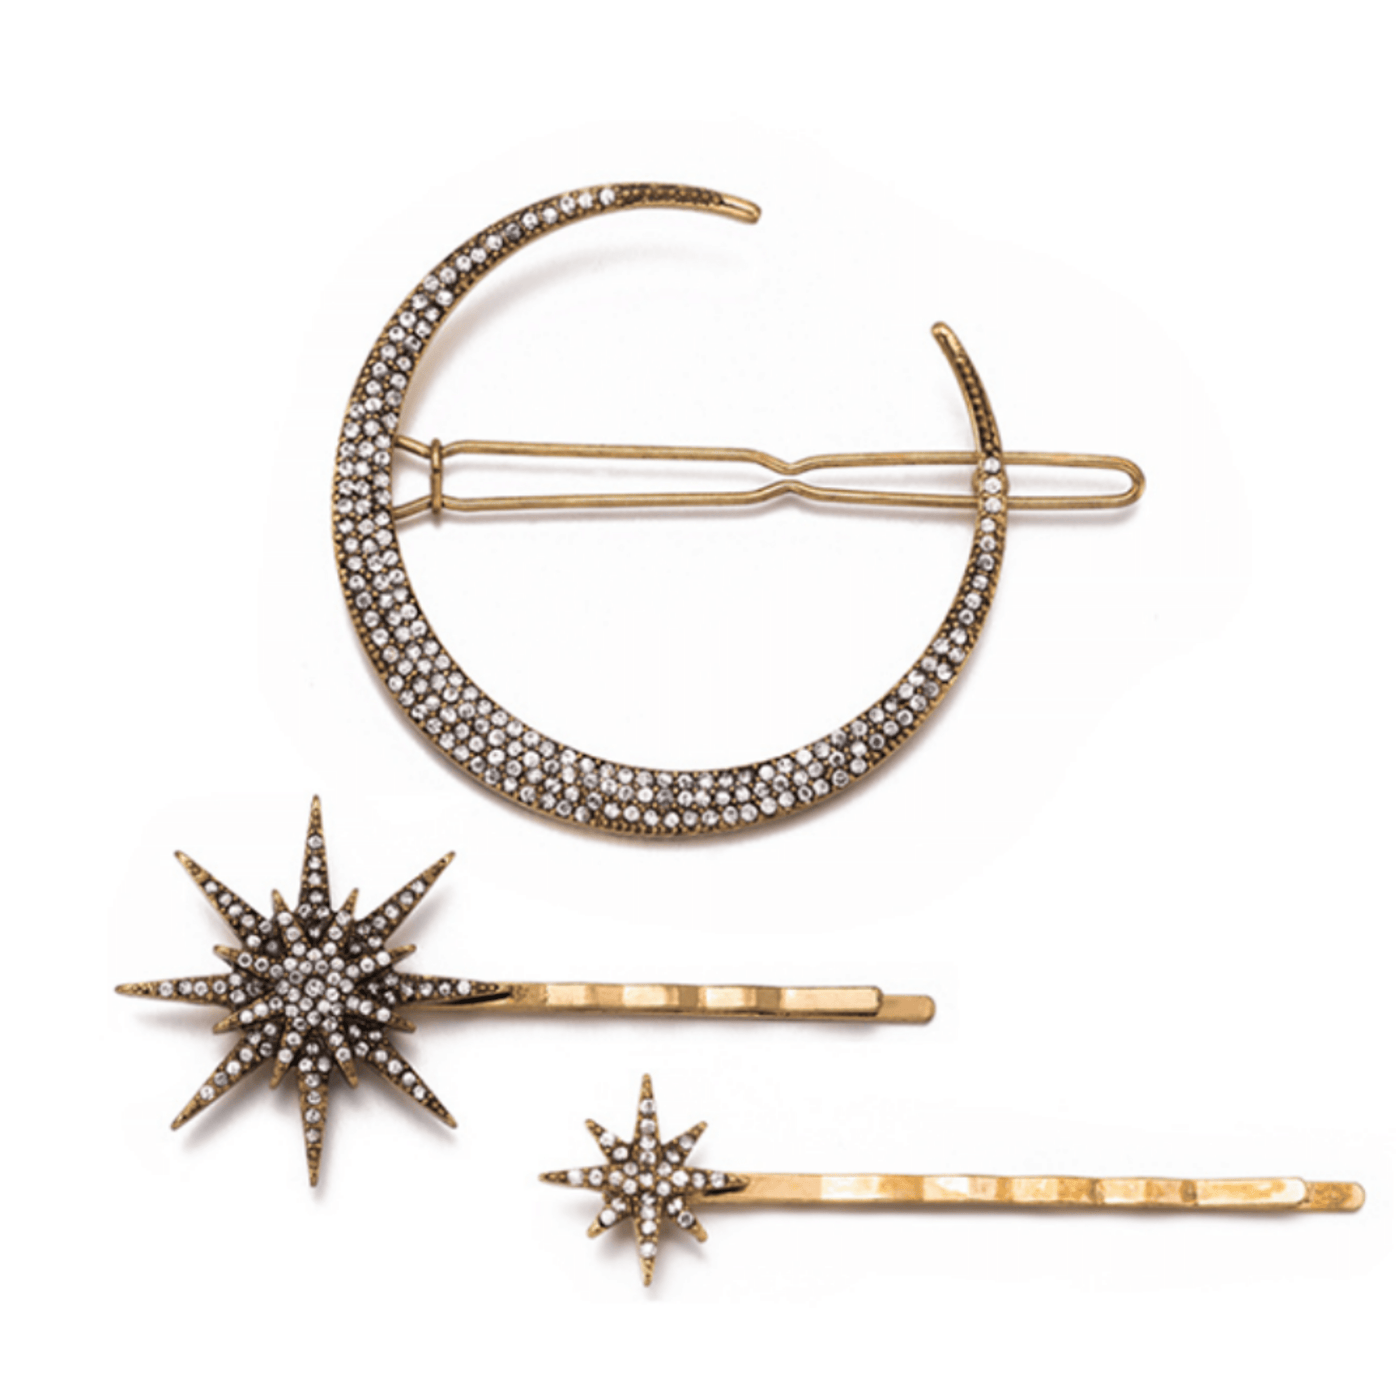 Crescent Moon and Star Hair Barrette Set Gold